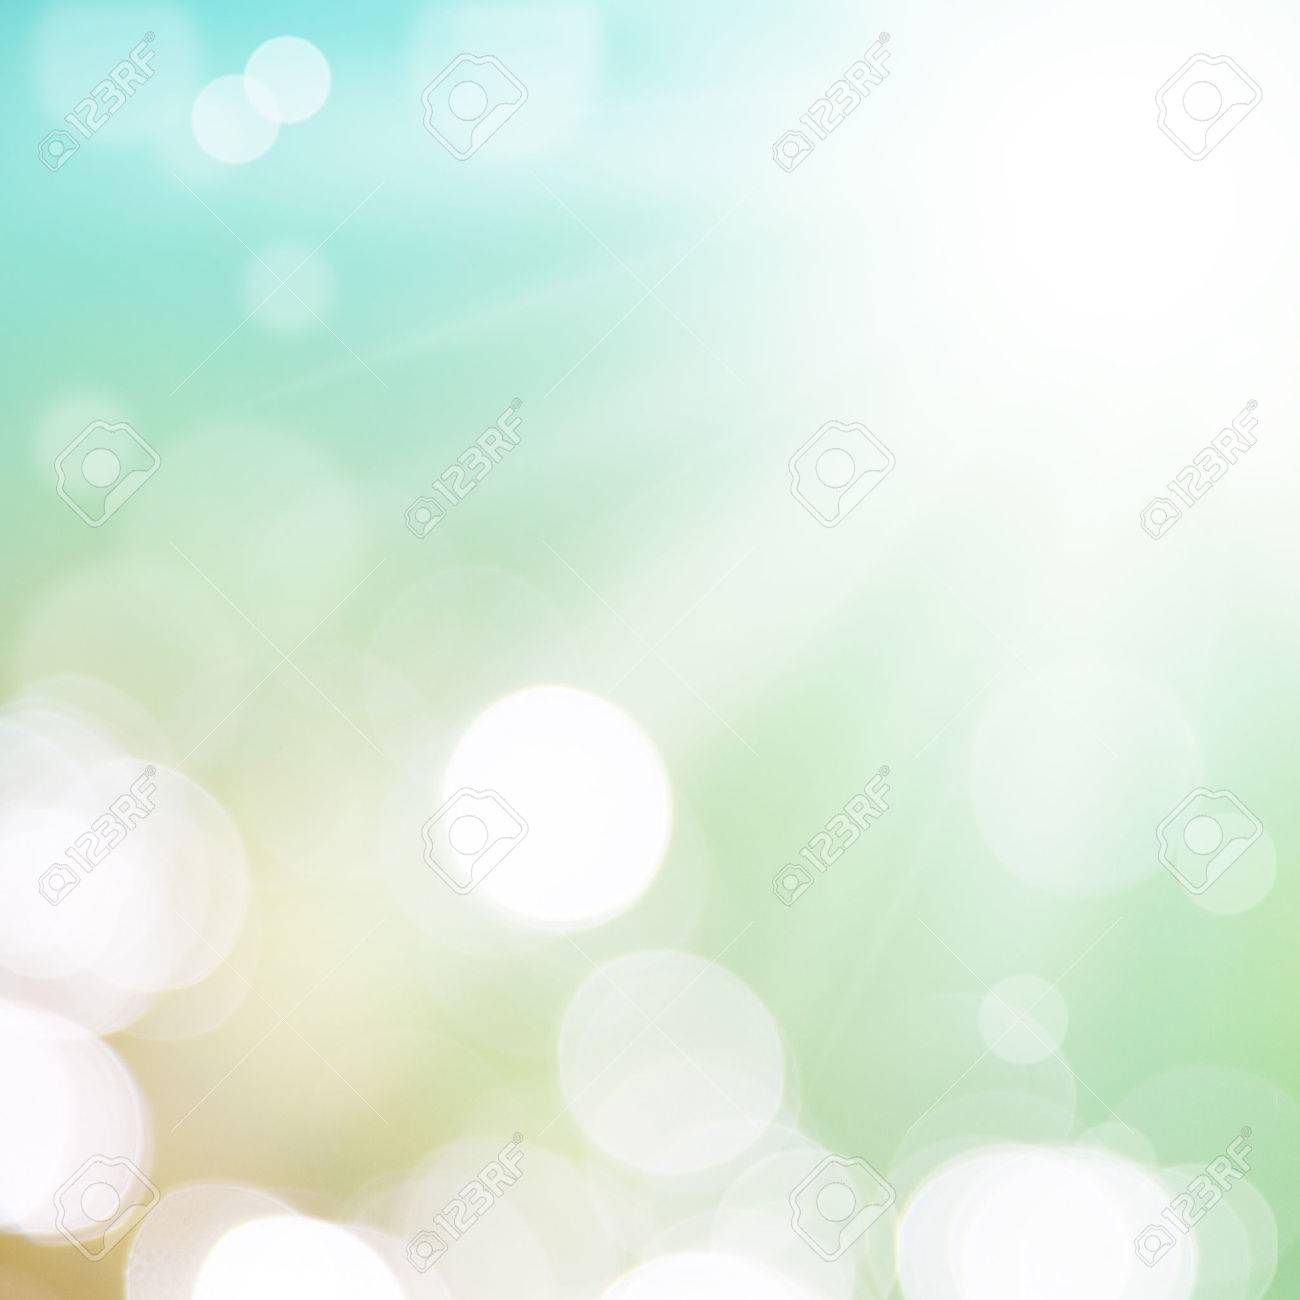 Abstract Summer Background Stock Photo Picture And Royalty